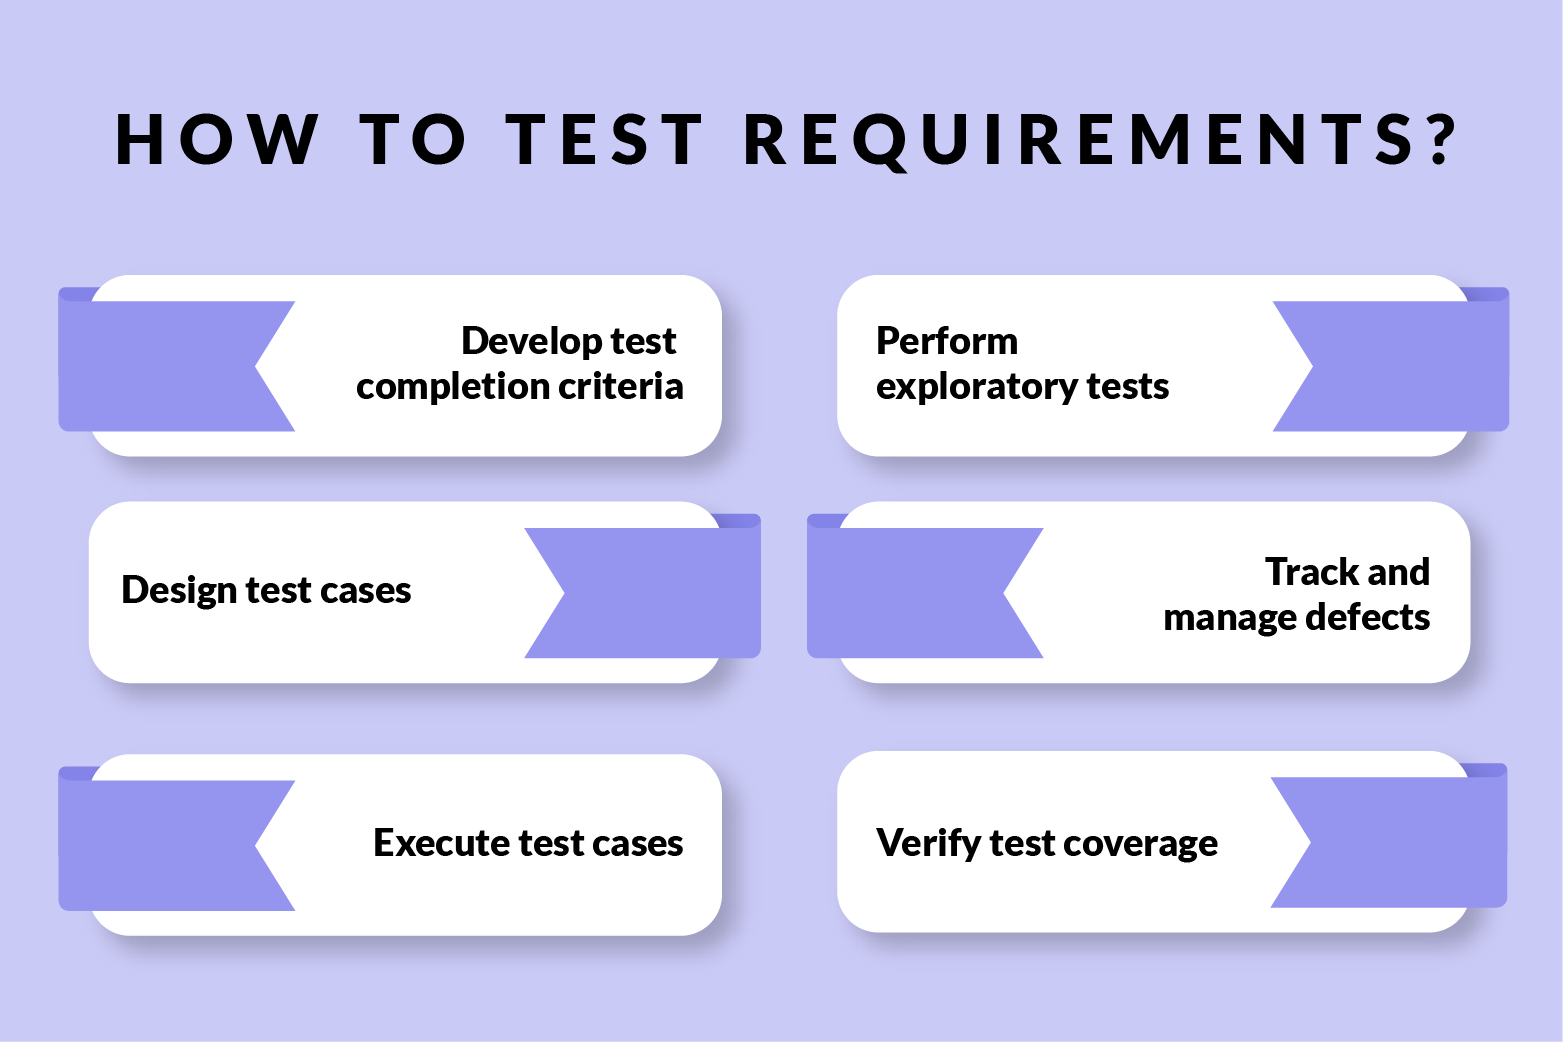 How to test requirements